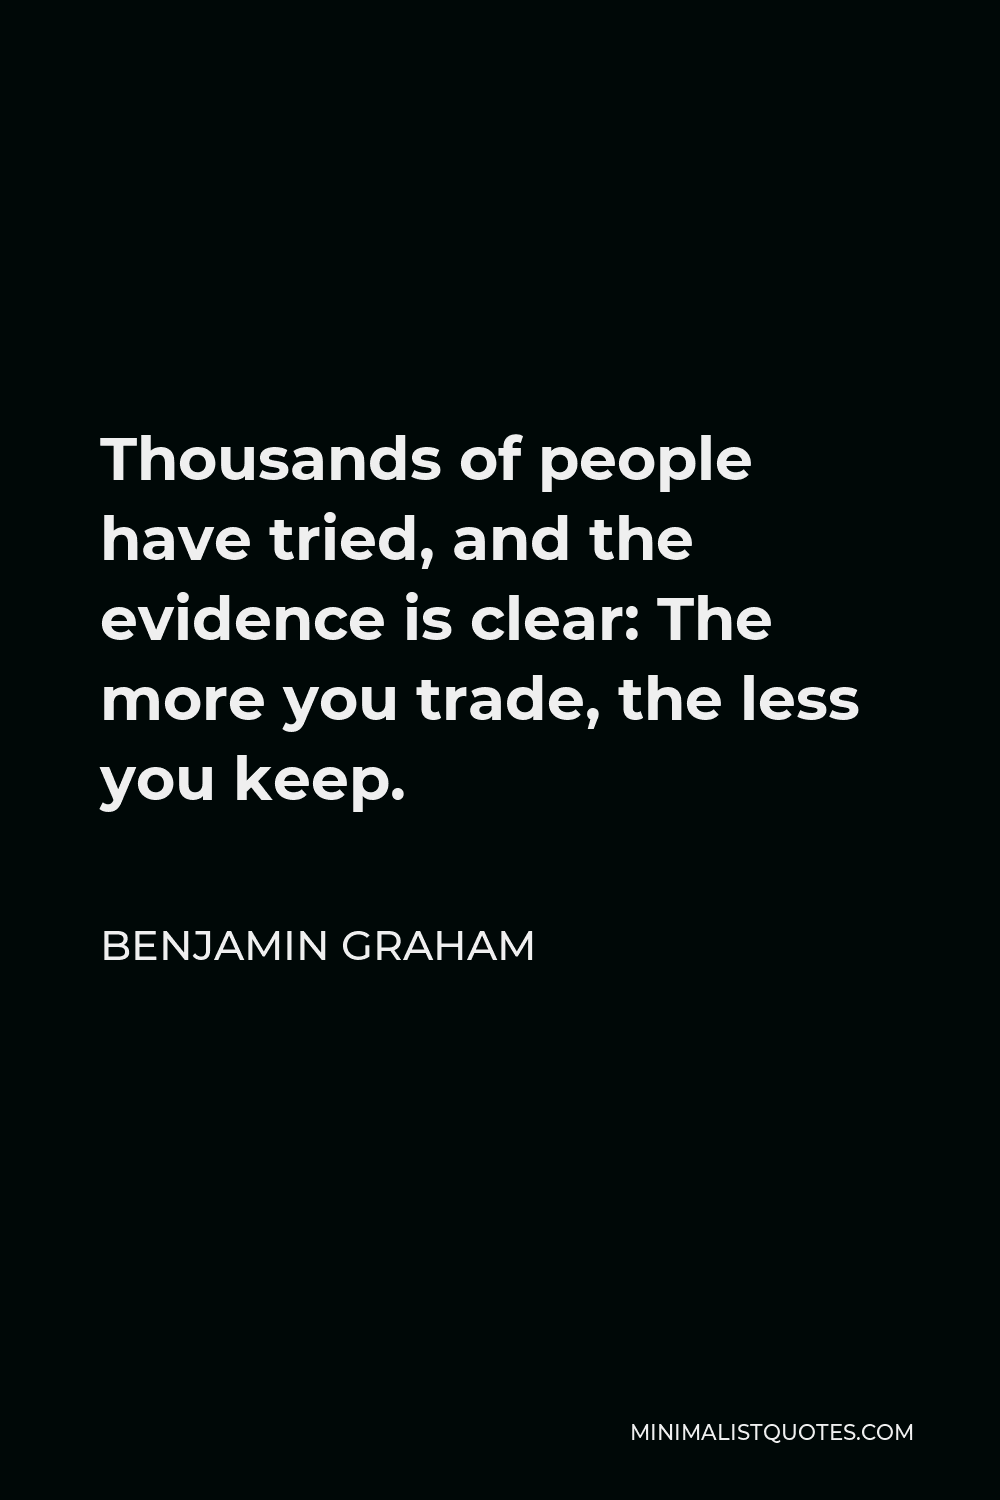 Benjamin Graham Quote - Thousands of people have tried, and the evidence is clear: The more you trade, the less you keep.